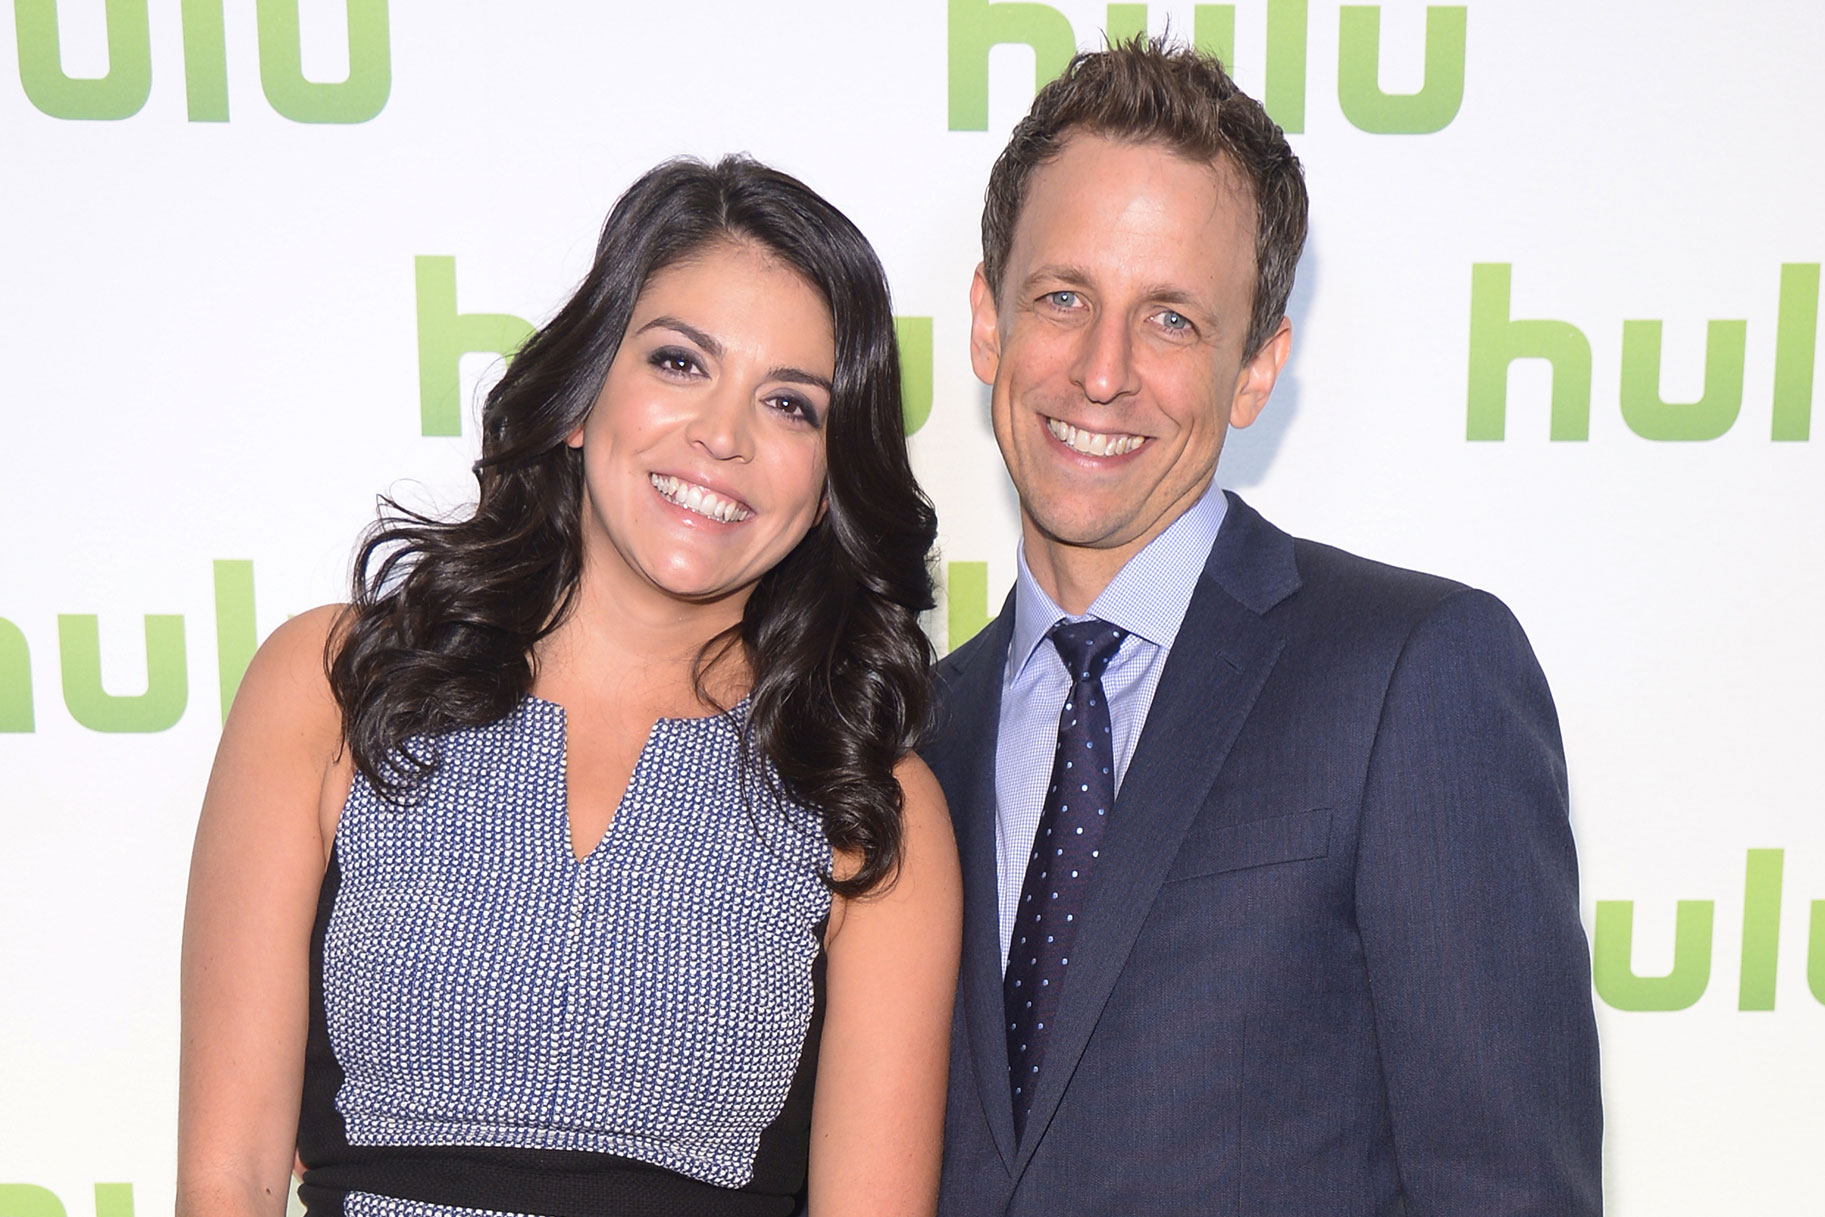 Seth Meyers and Cecily Strong